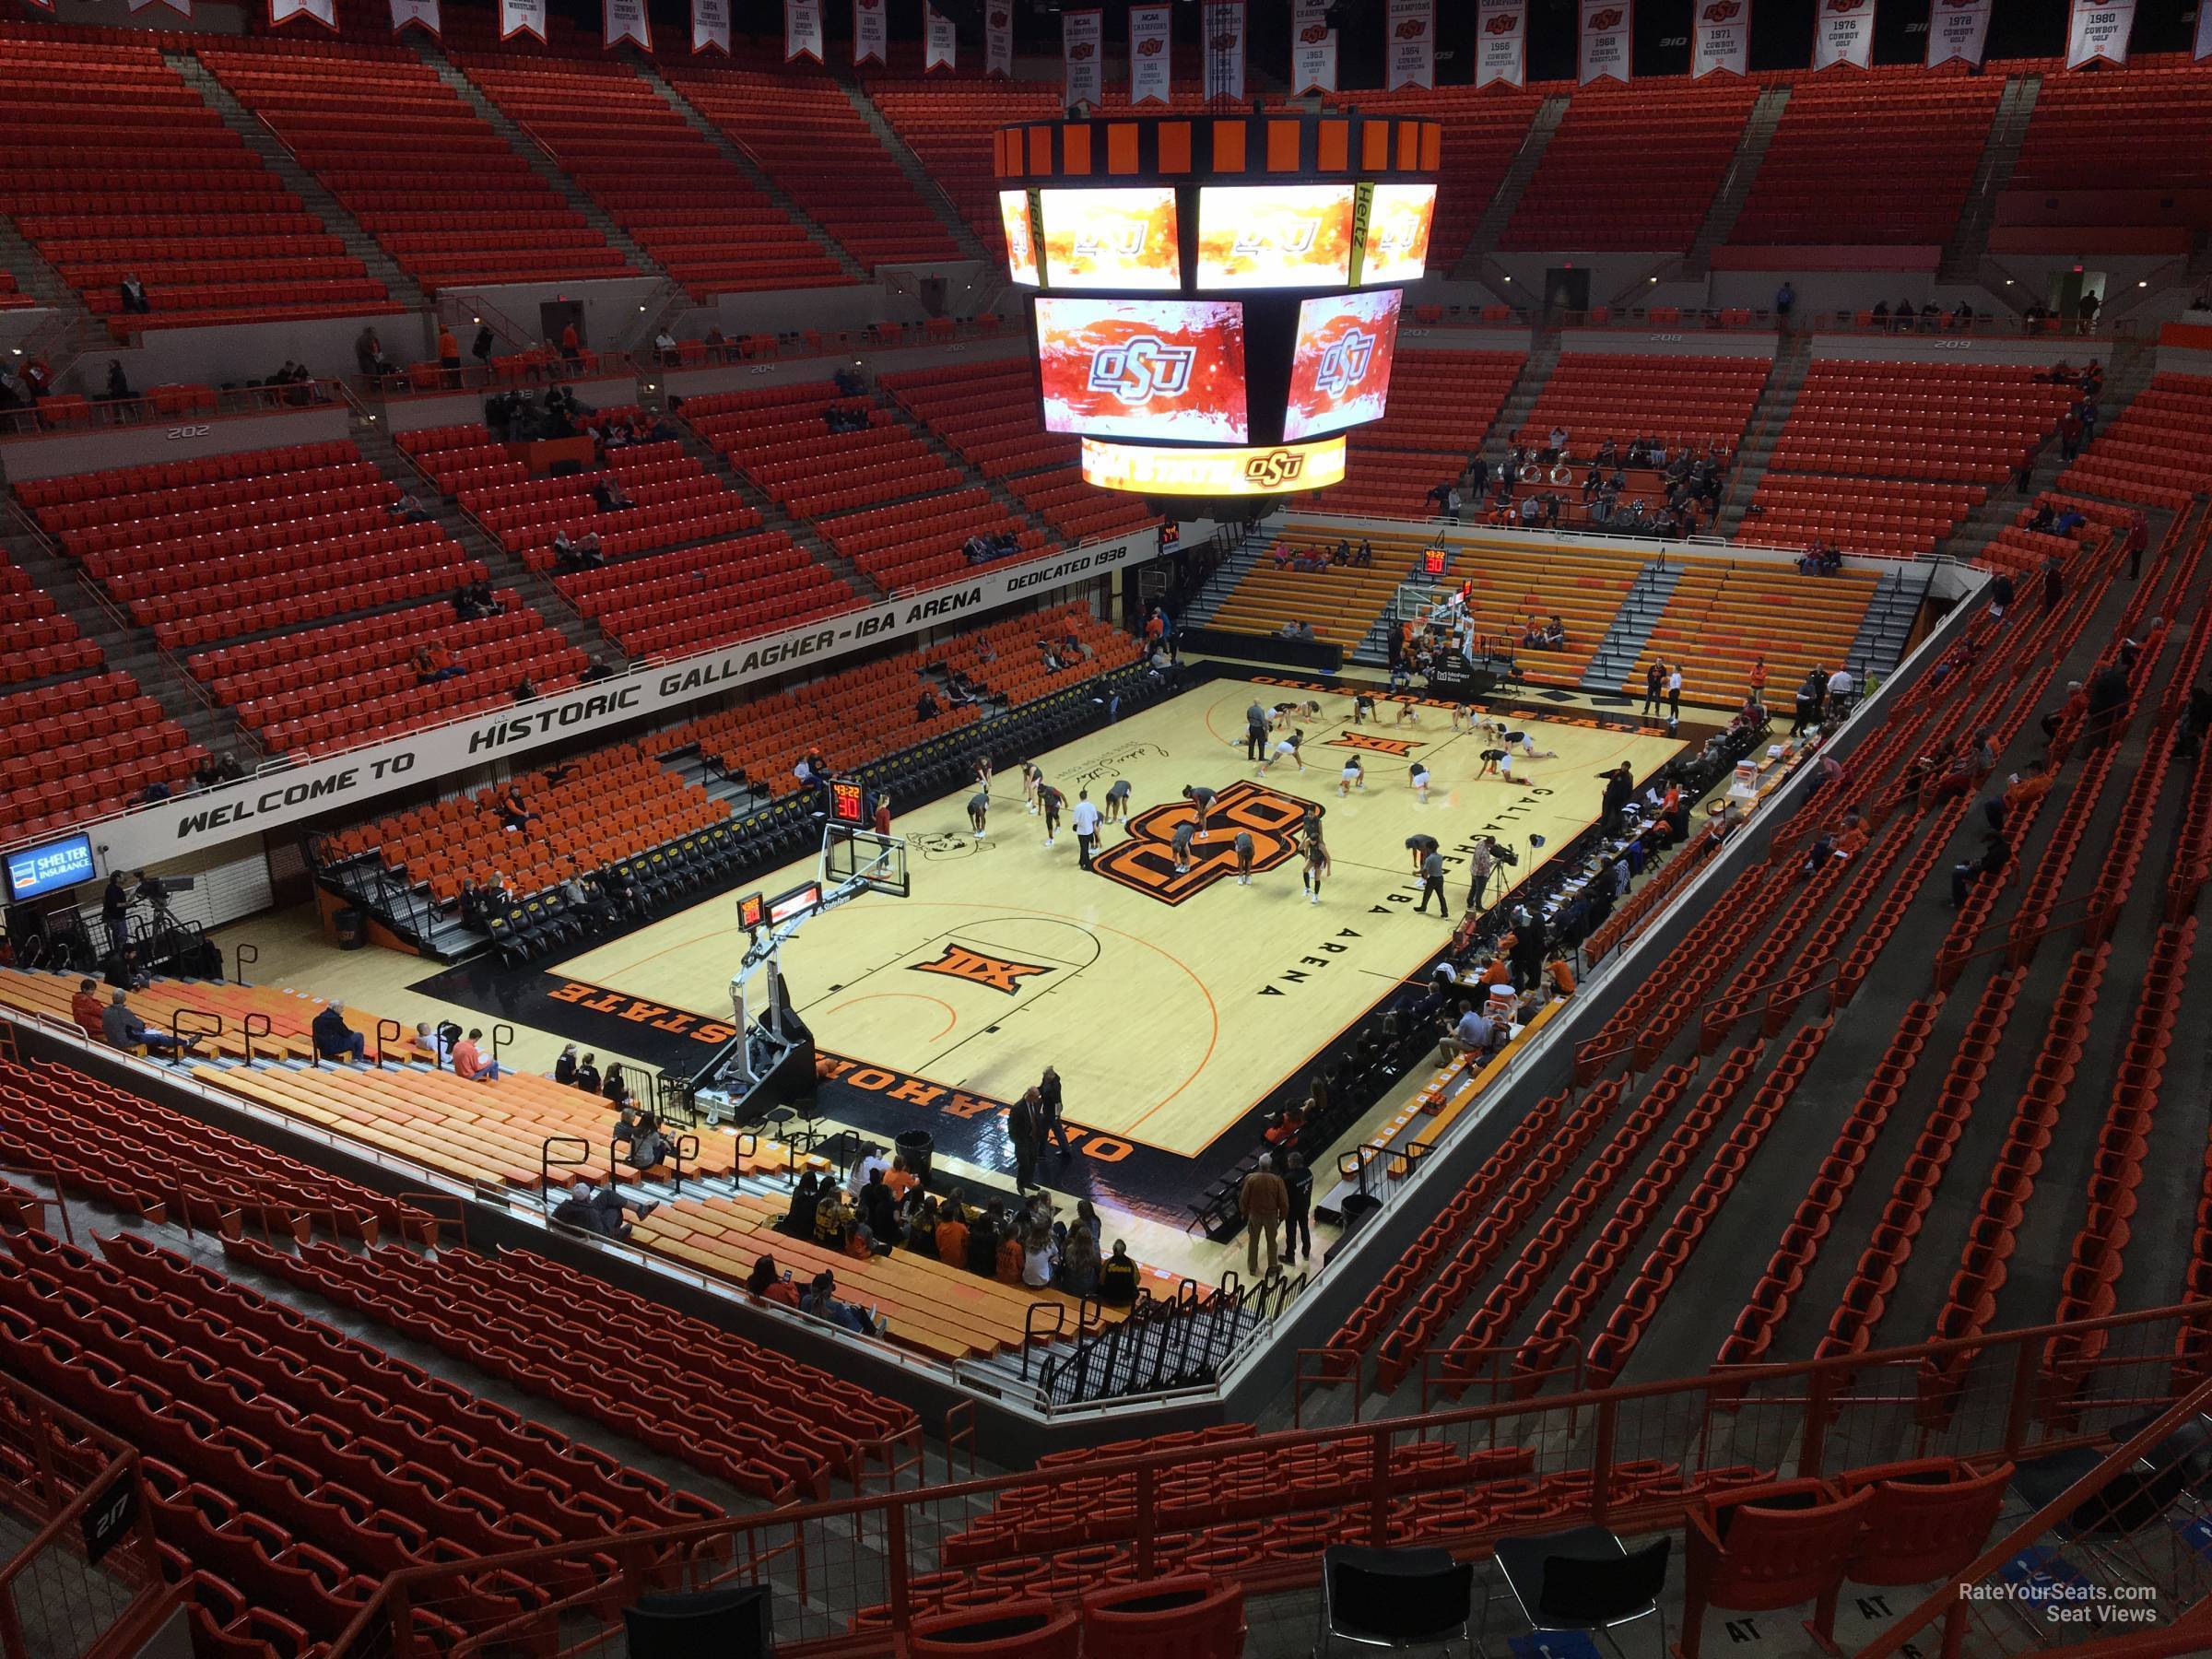 section 322, row 5 seat view  - gallagher-iba arena